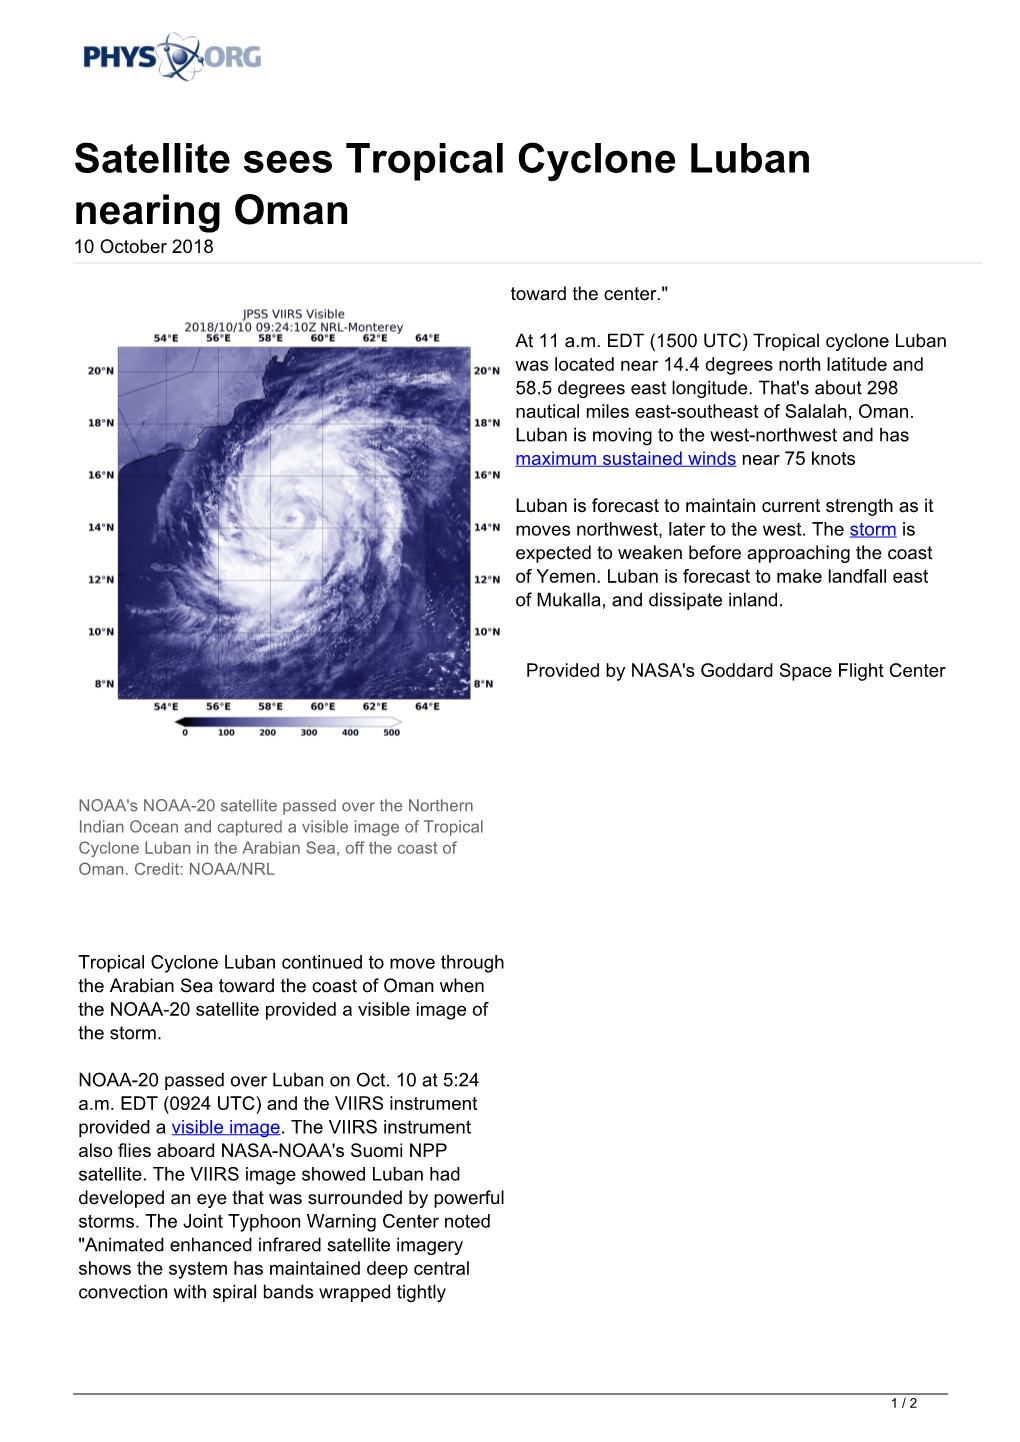 Satellite Sees Tropical Cyclone Luban Nearing Oman 10 October 2018